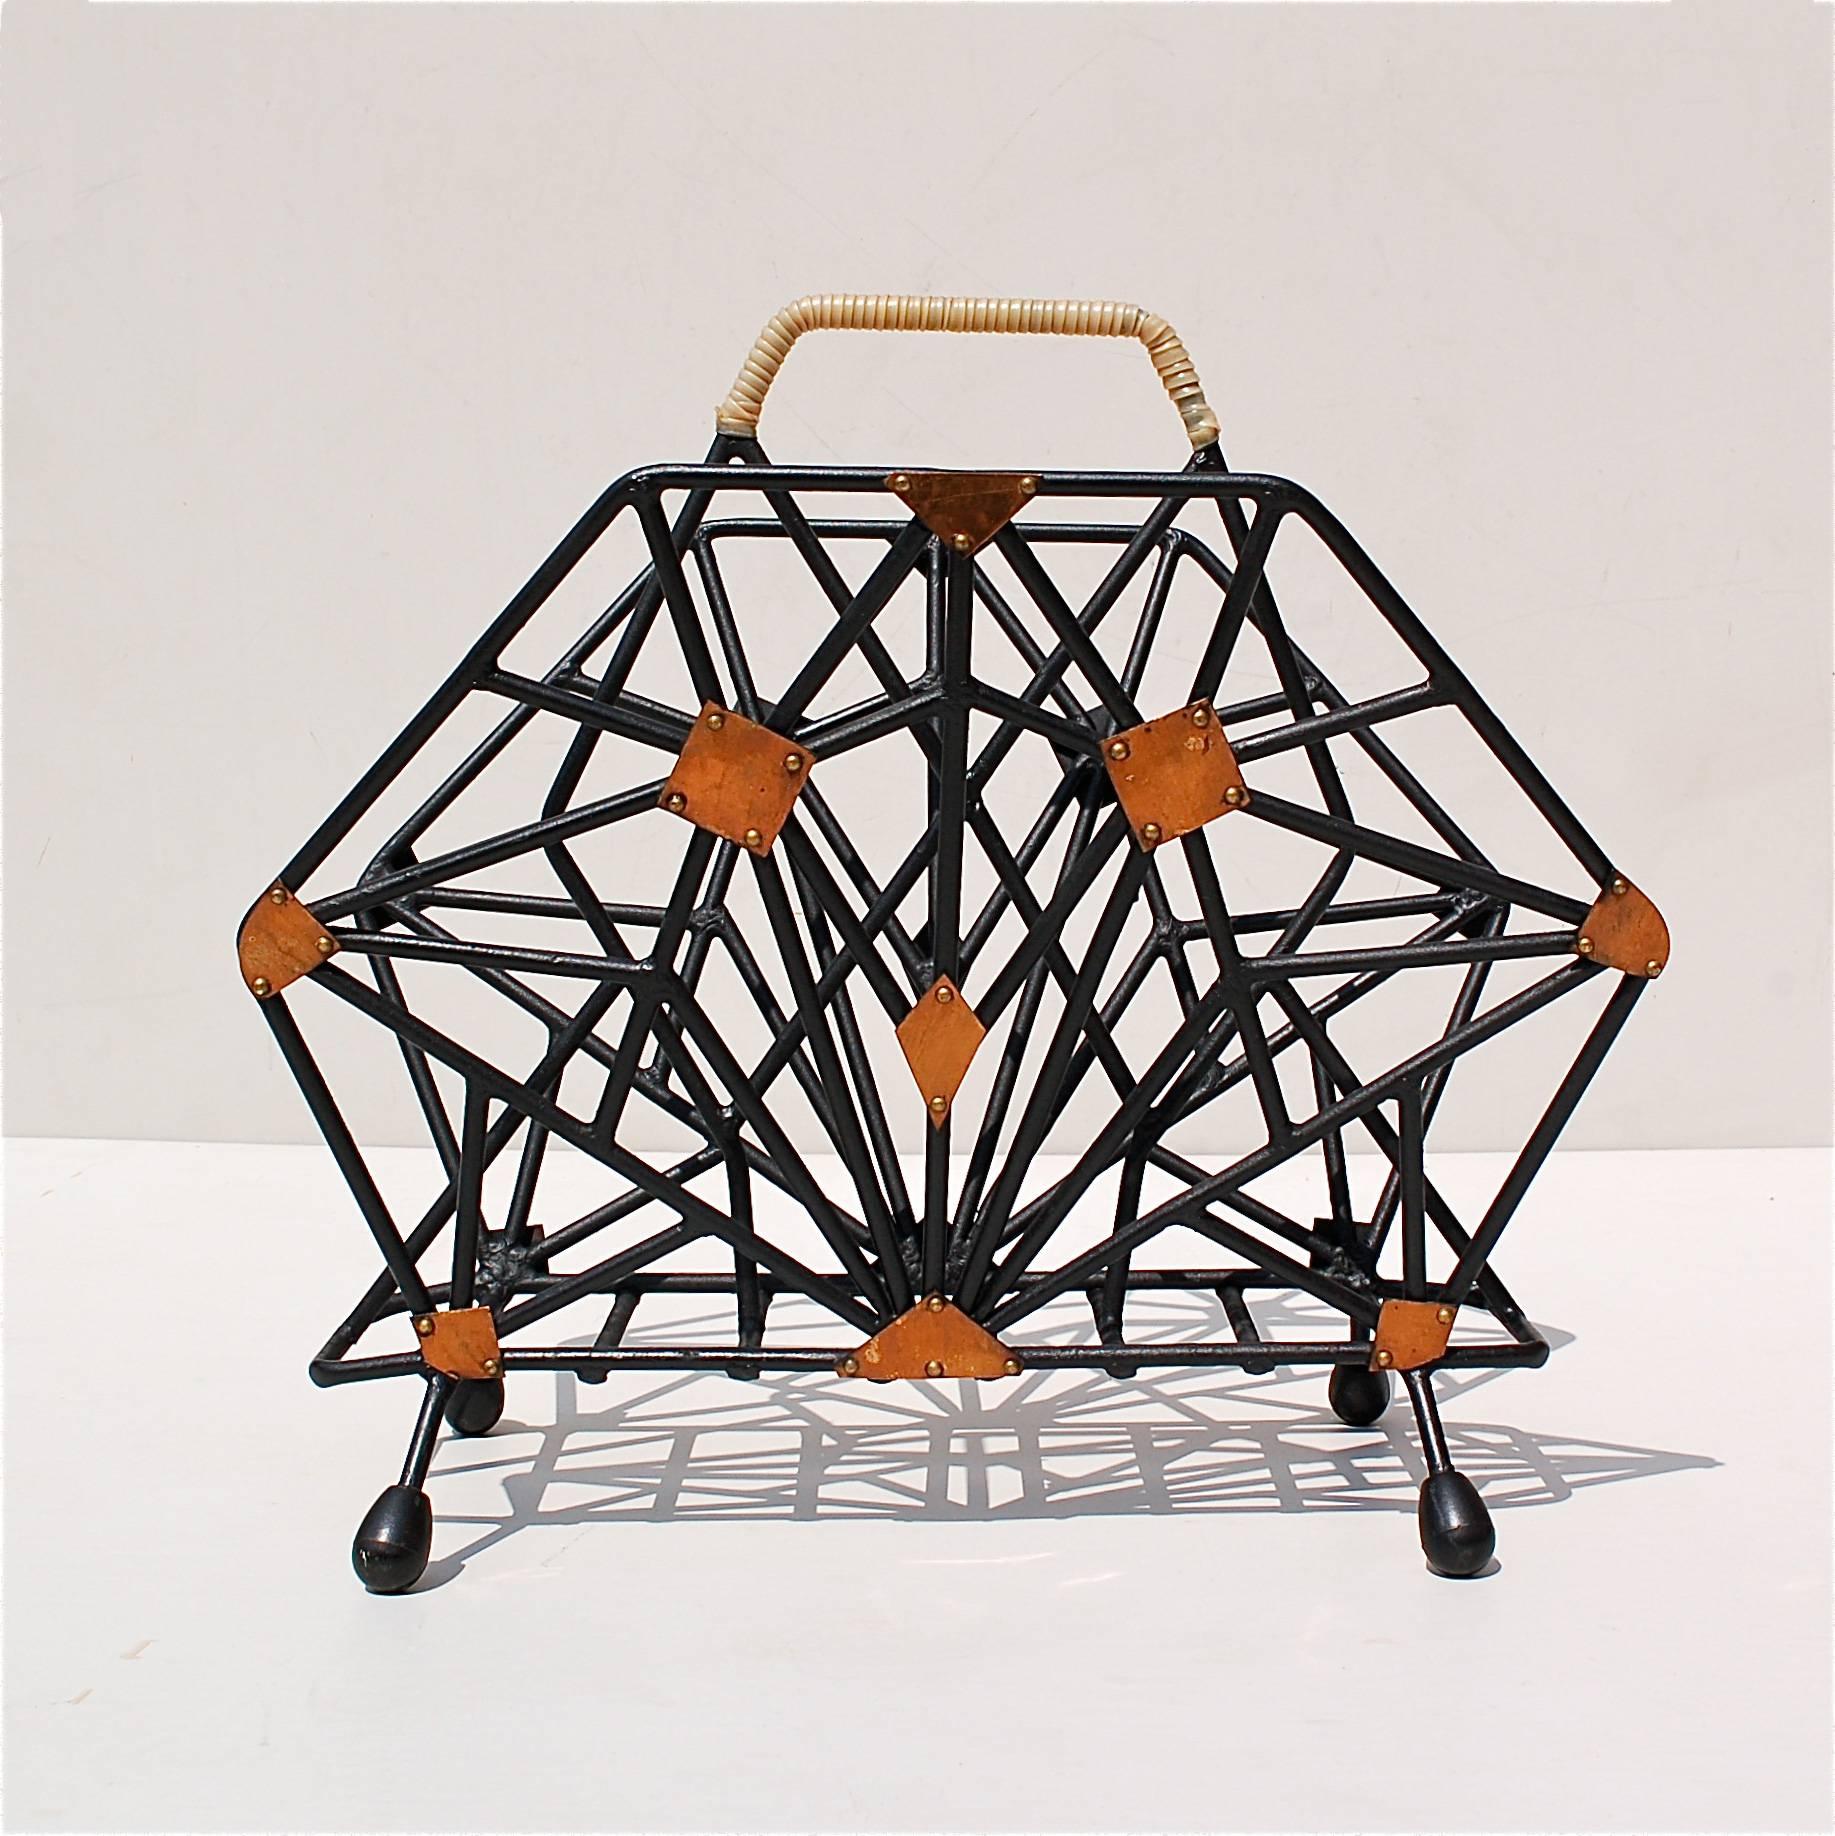 Cubist style magazine rack dating from the 1940s made from thin metal rods welded together to form a complex geometric pattern that is identical on either side. The shape of the side panels is hexagonal, having six straight sides and six angles.